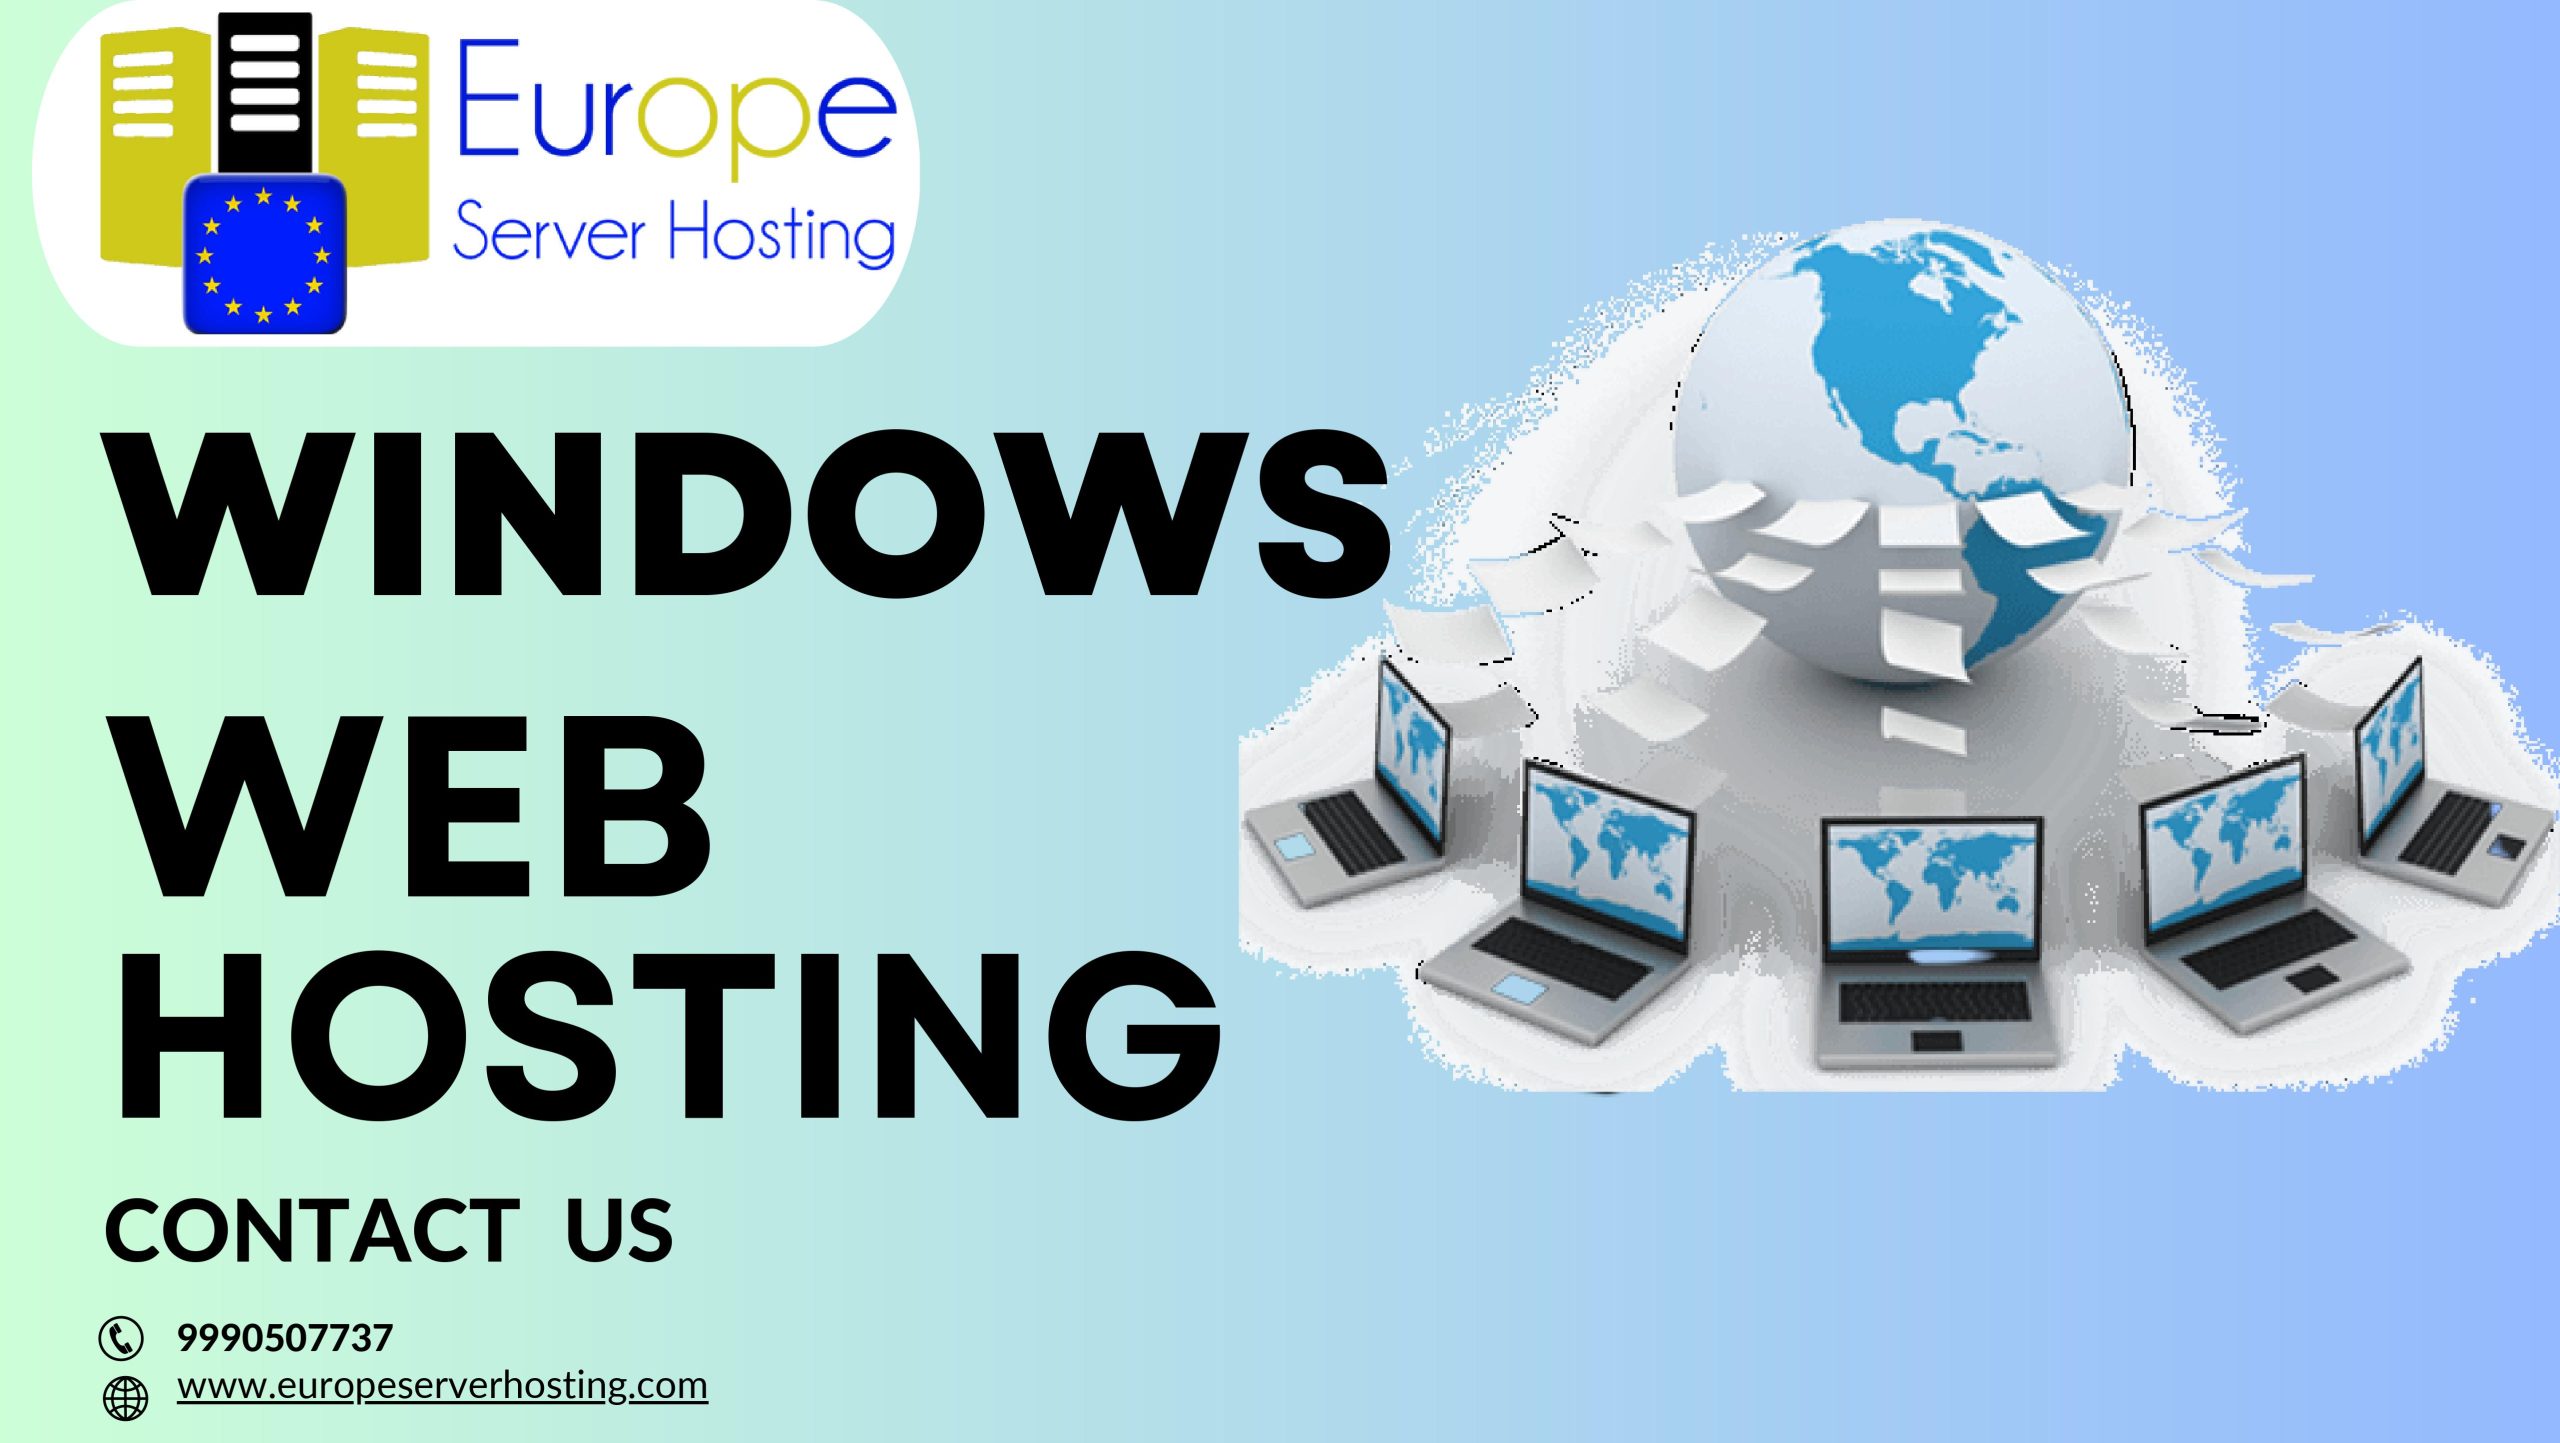 Learn about the benefits, features, and how to get started with hosting your website on Windows.